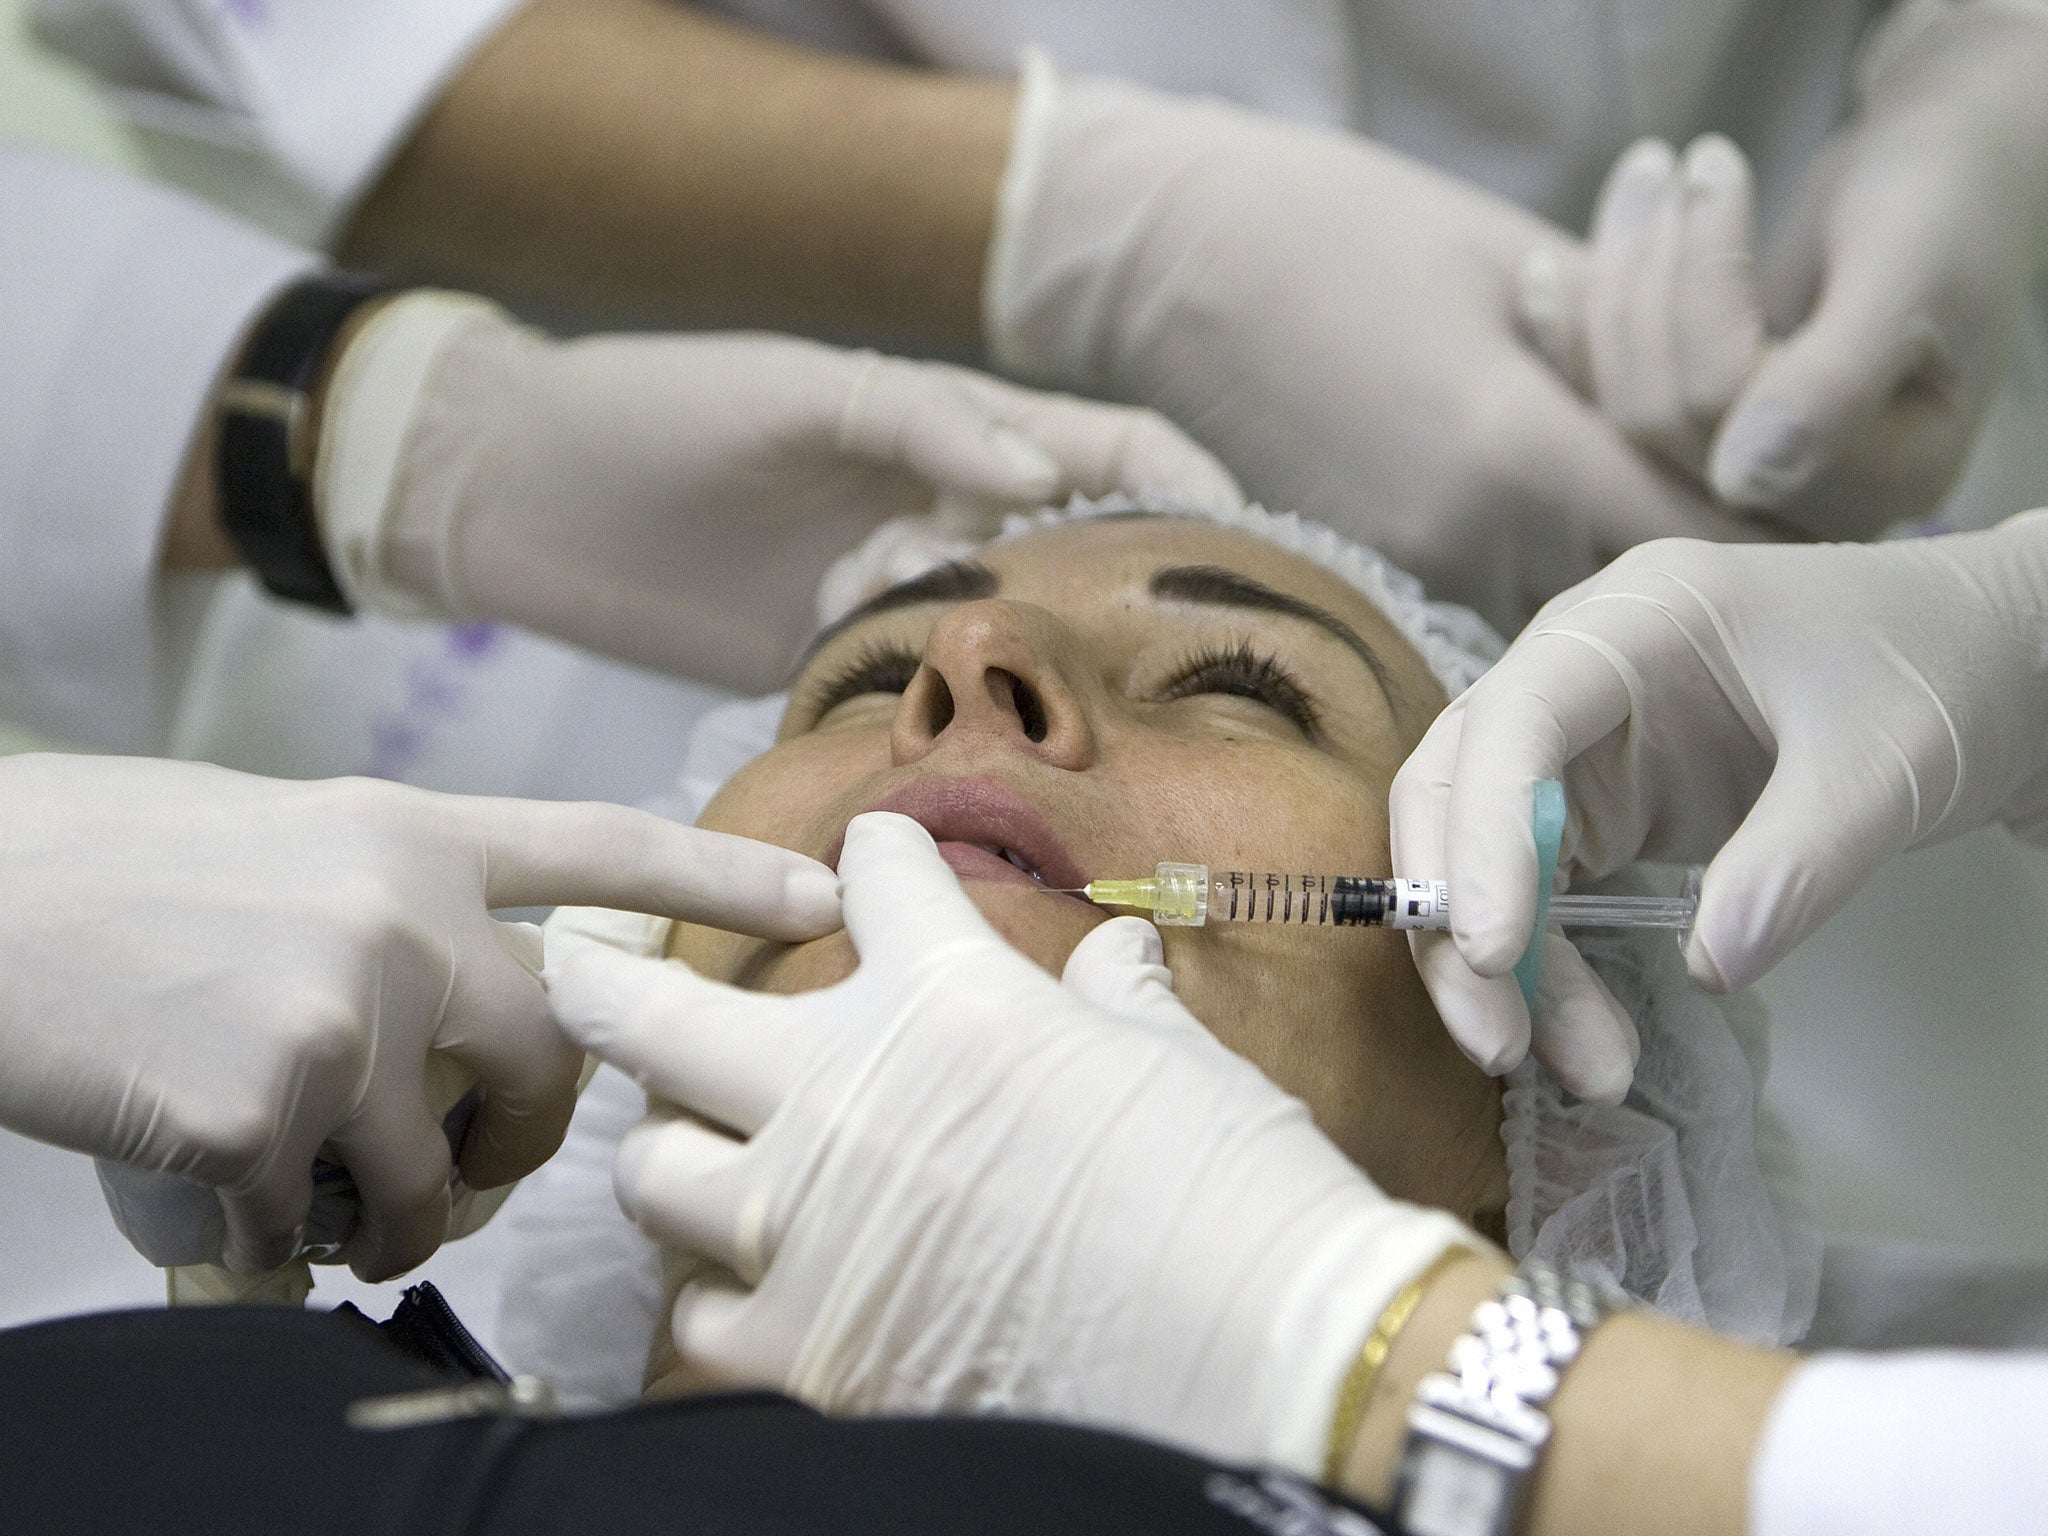 Leila Veiga receives a treatment with hialuronic acid at the Brazilian Society for Aesthetic Medicine, as part of a free beauty treatment, on November 13, 2008 in Rio de Janeiro, Brazil.